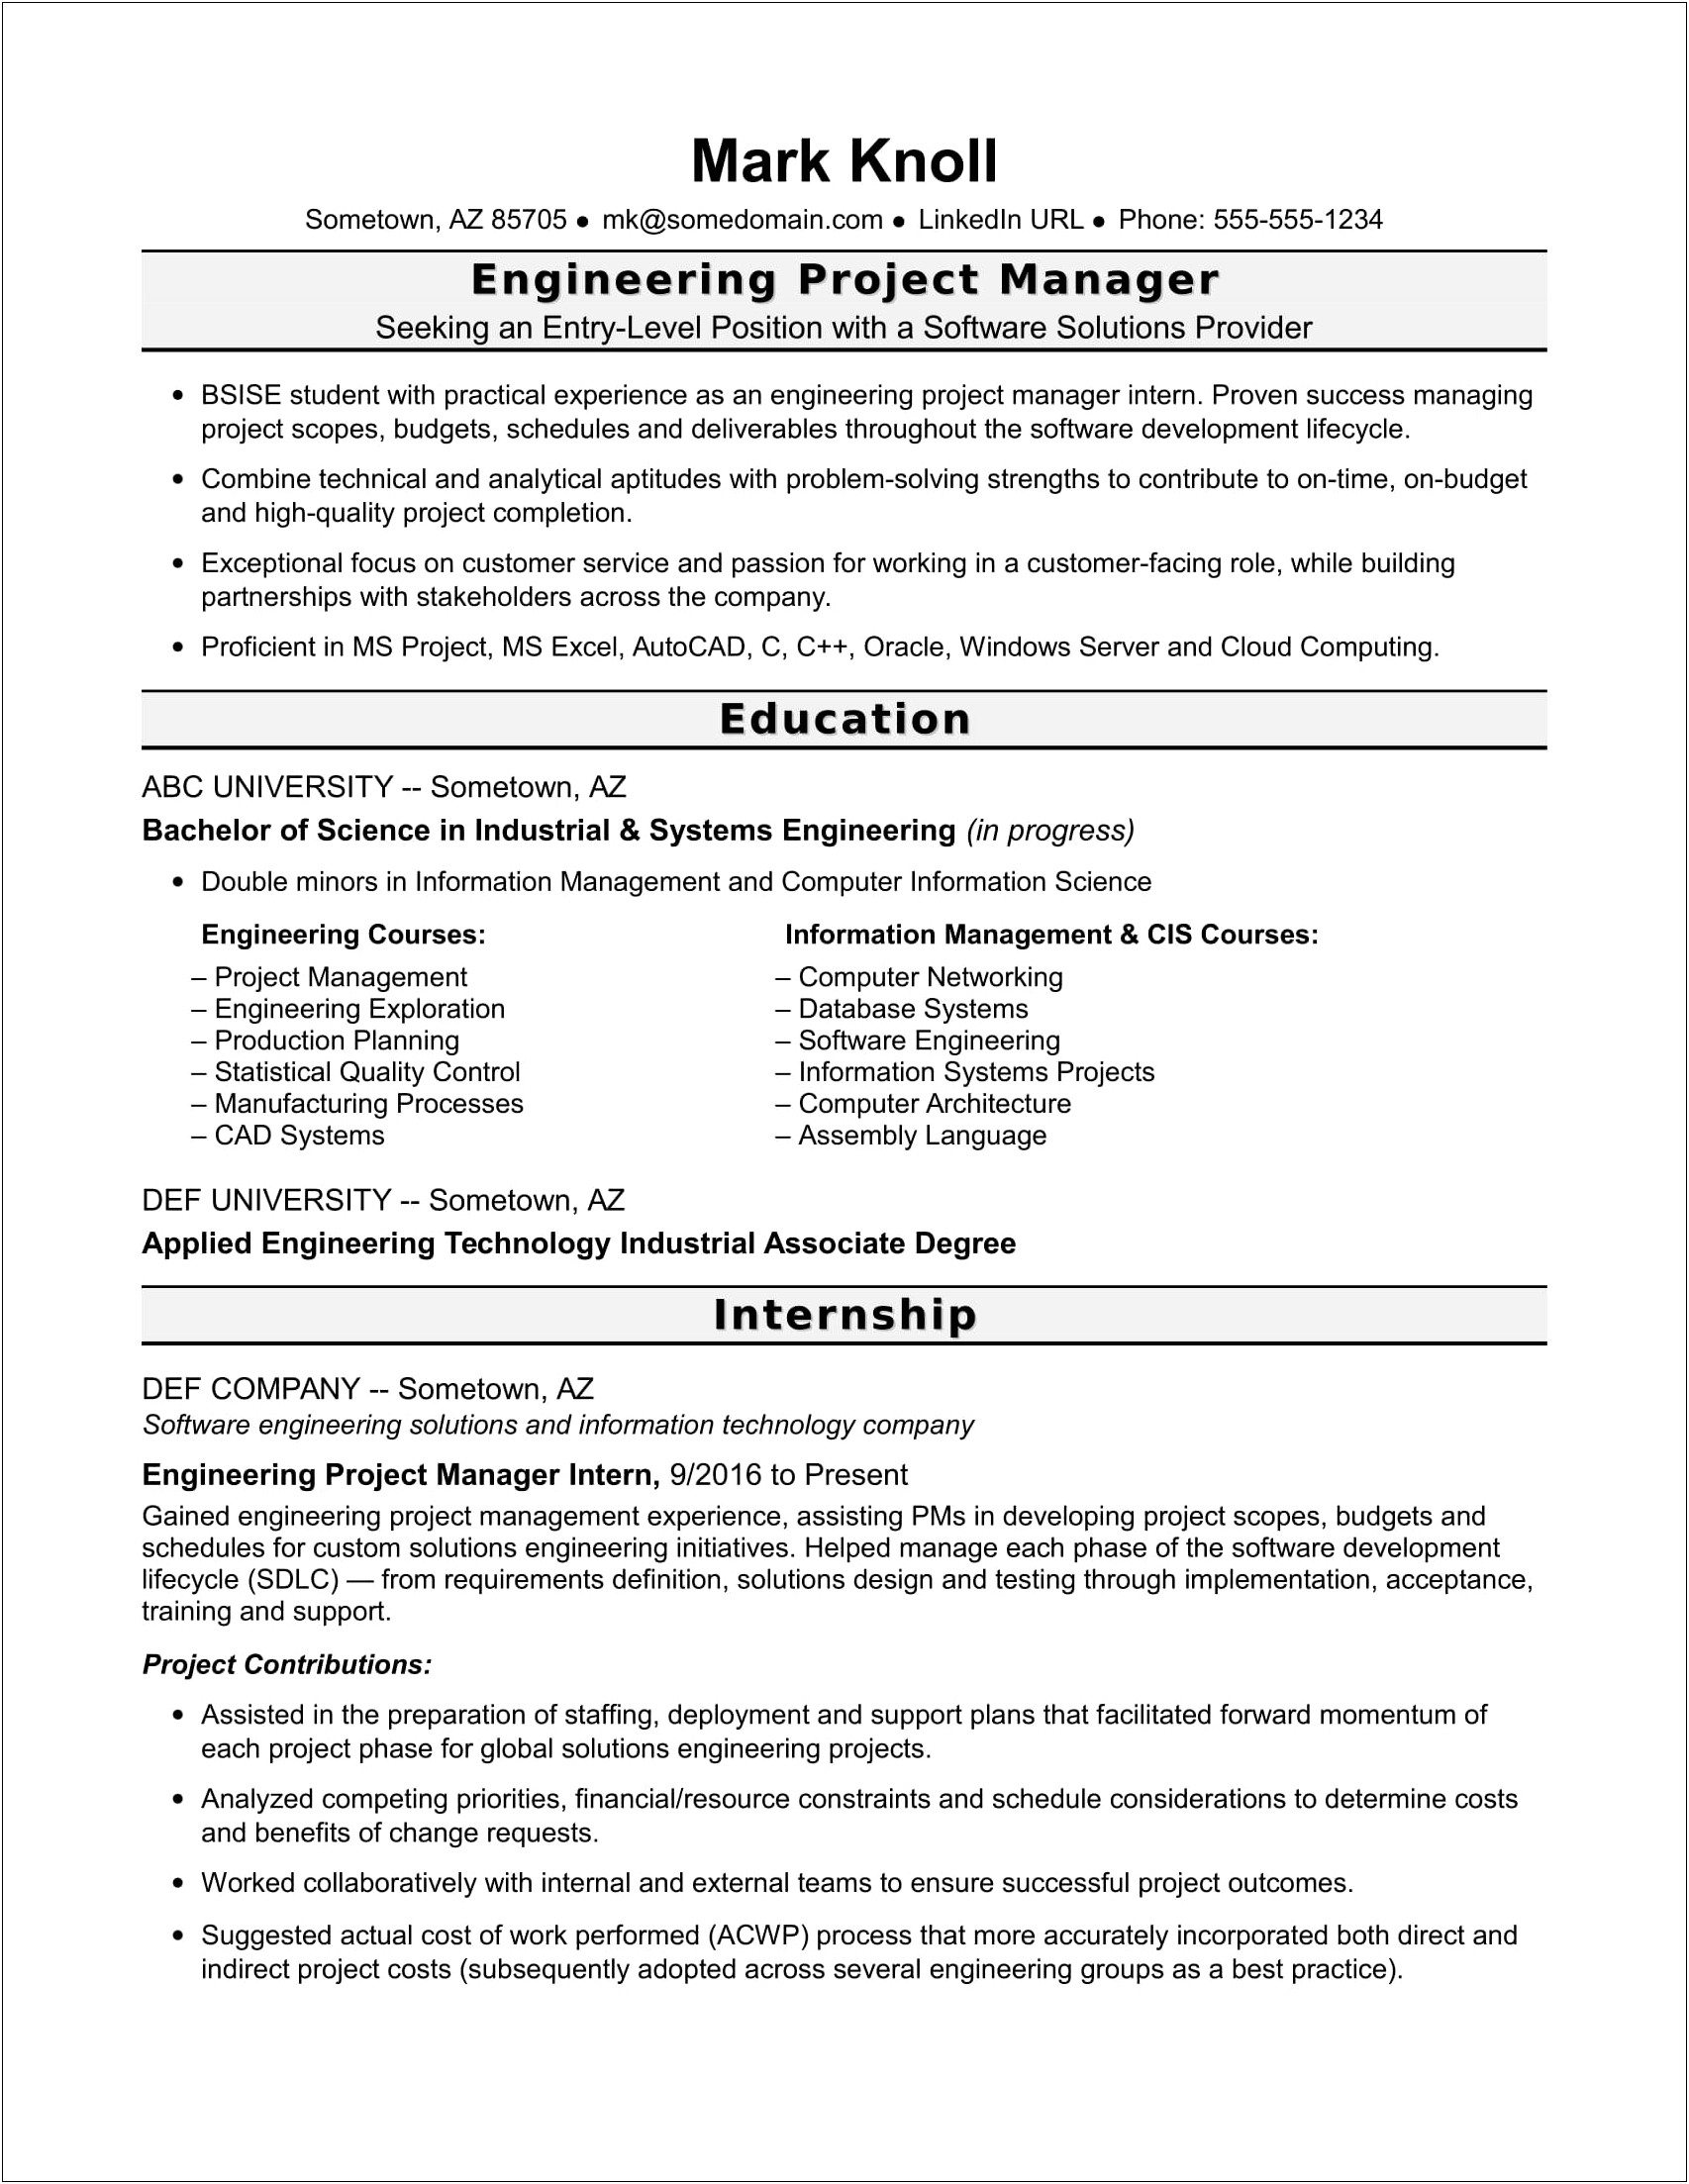 Project Manager Information Technology Resume